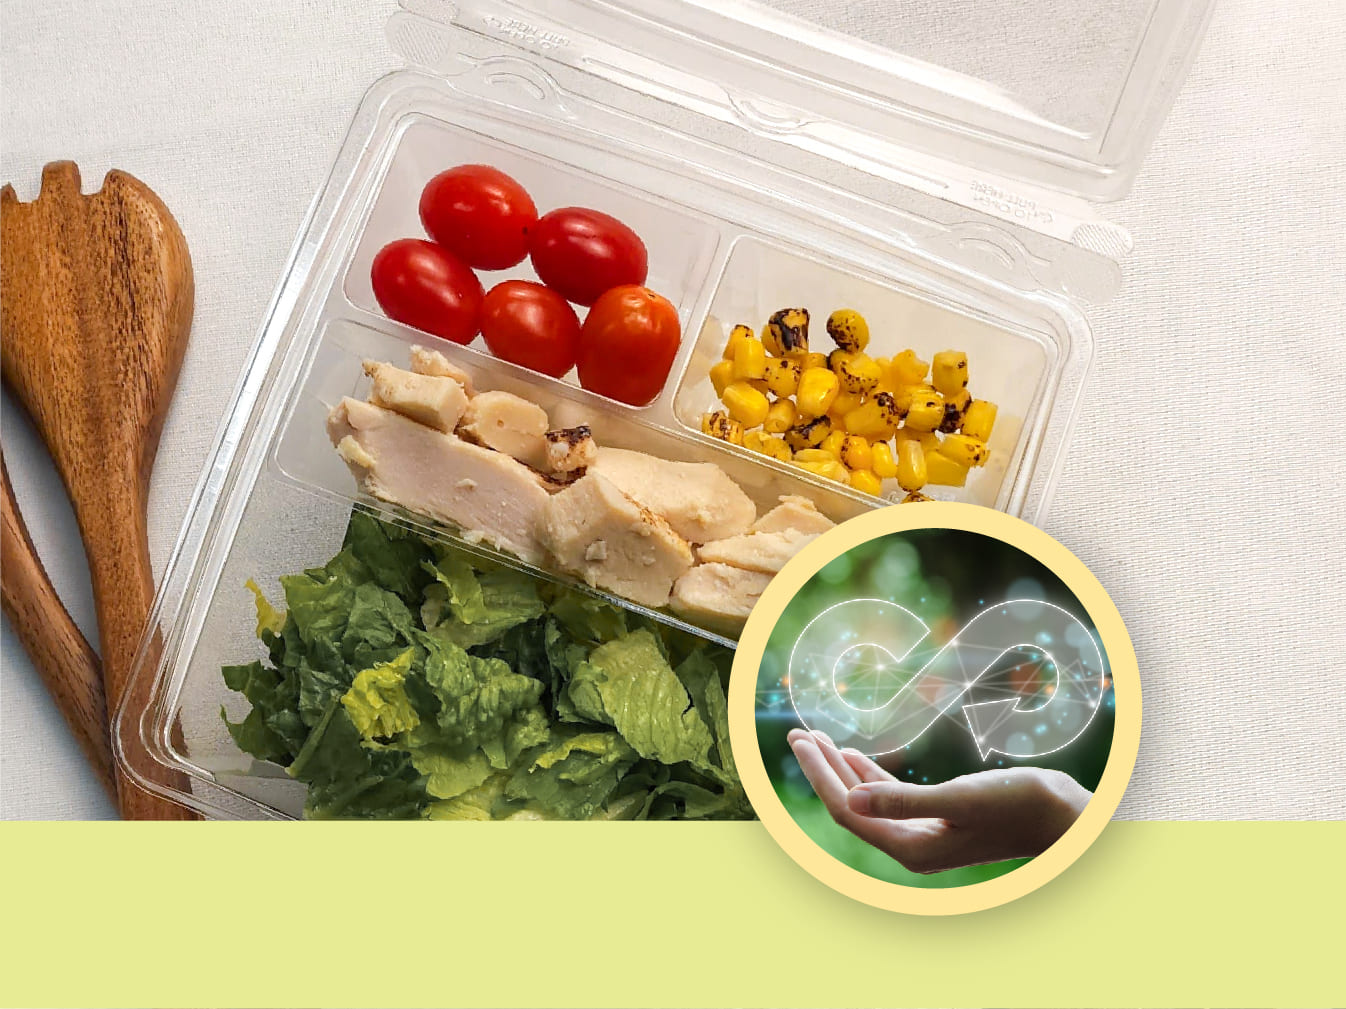 Recyclable Food Containers: What Consumers Want to Know featured image